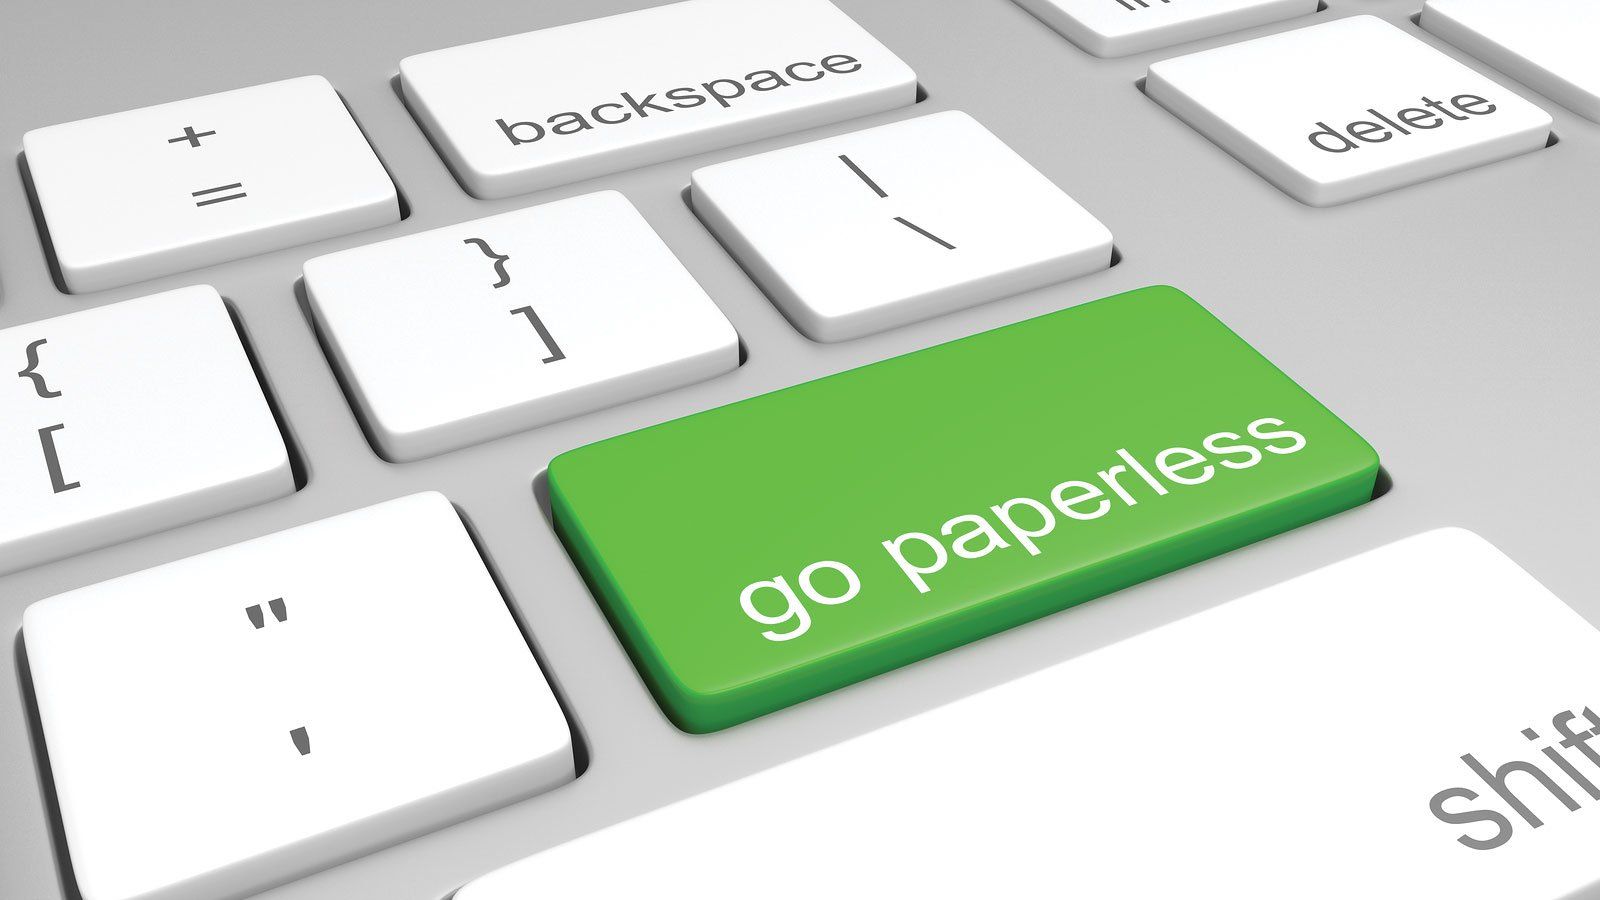 Go Paperless green discount button image